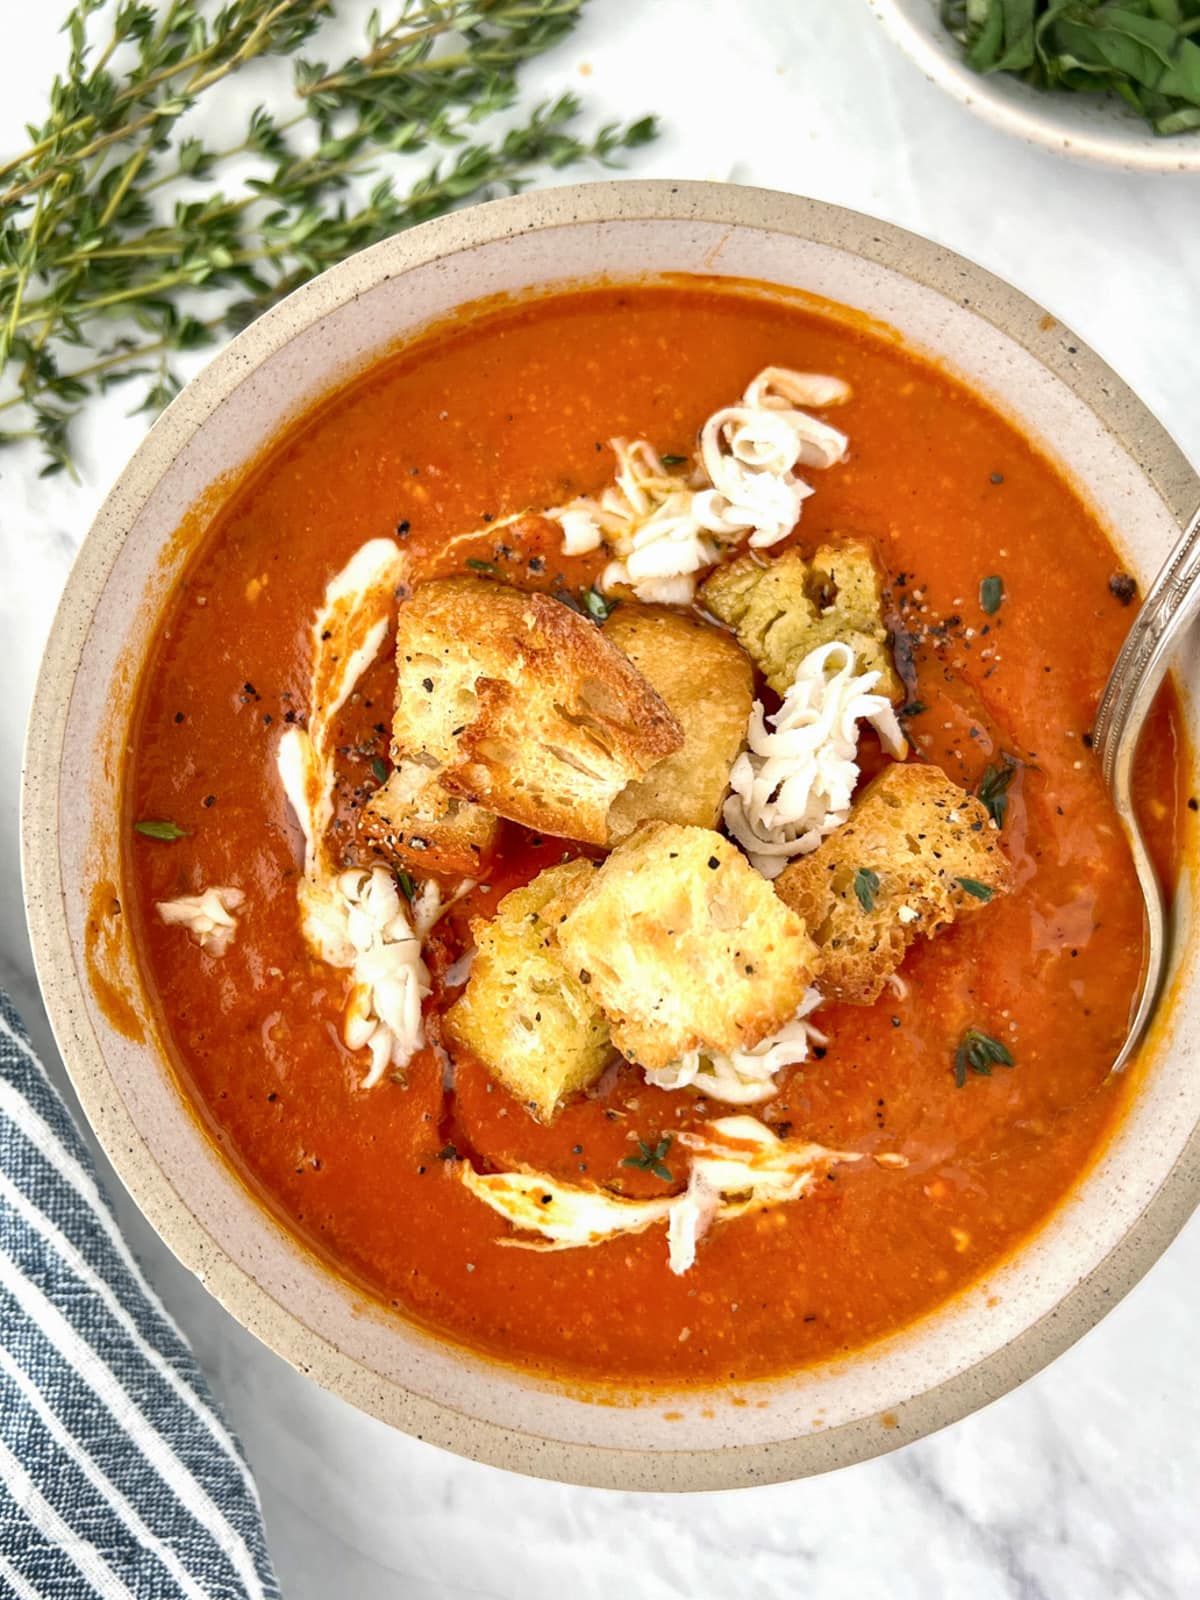 Bowl of tomato soup topped with croutons and shredded cheese.